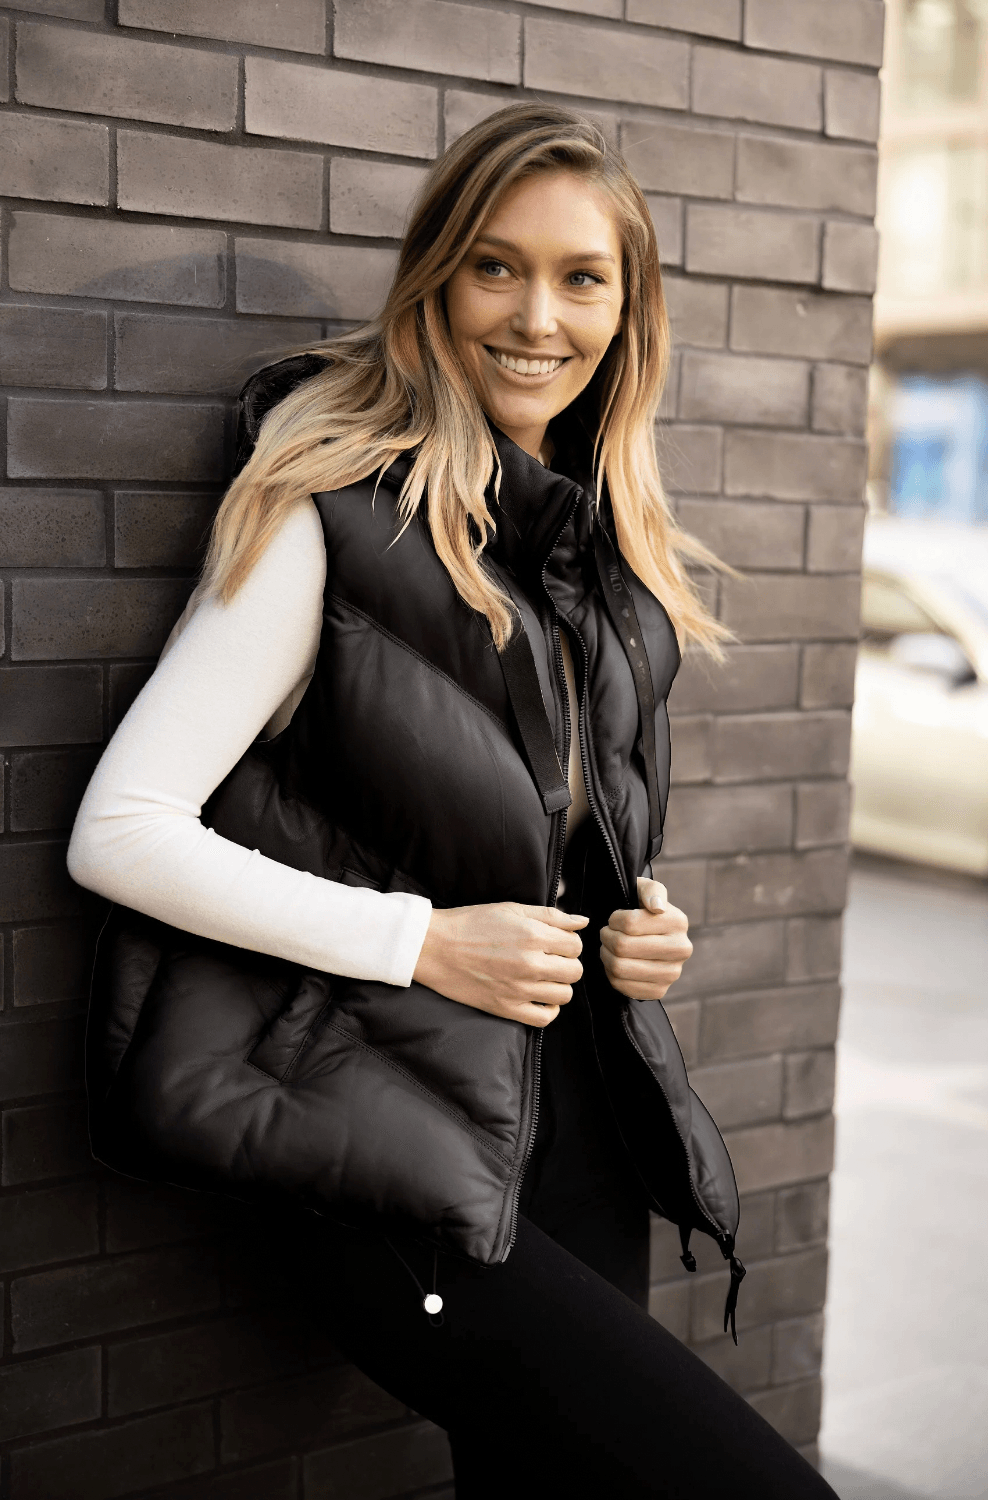 Namica Leather Vest by Mauritius - Haven